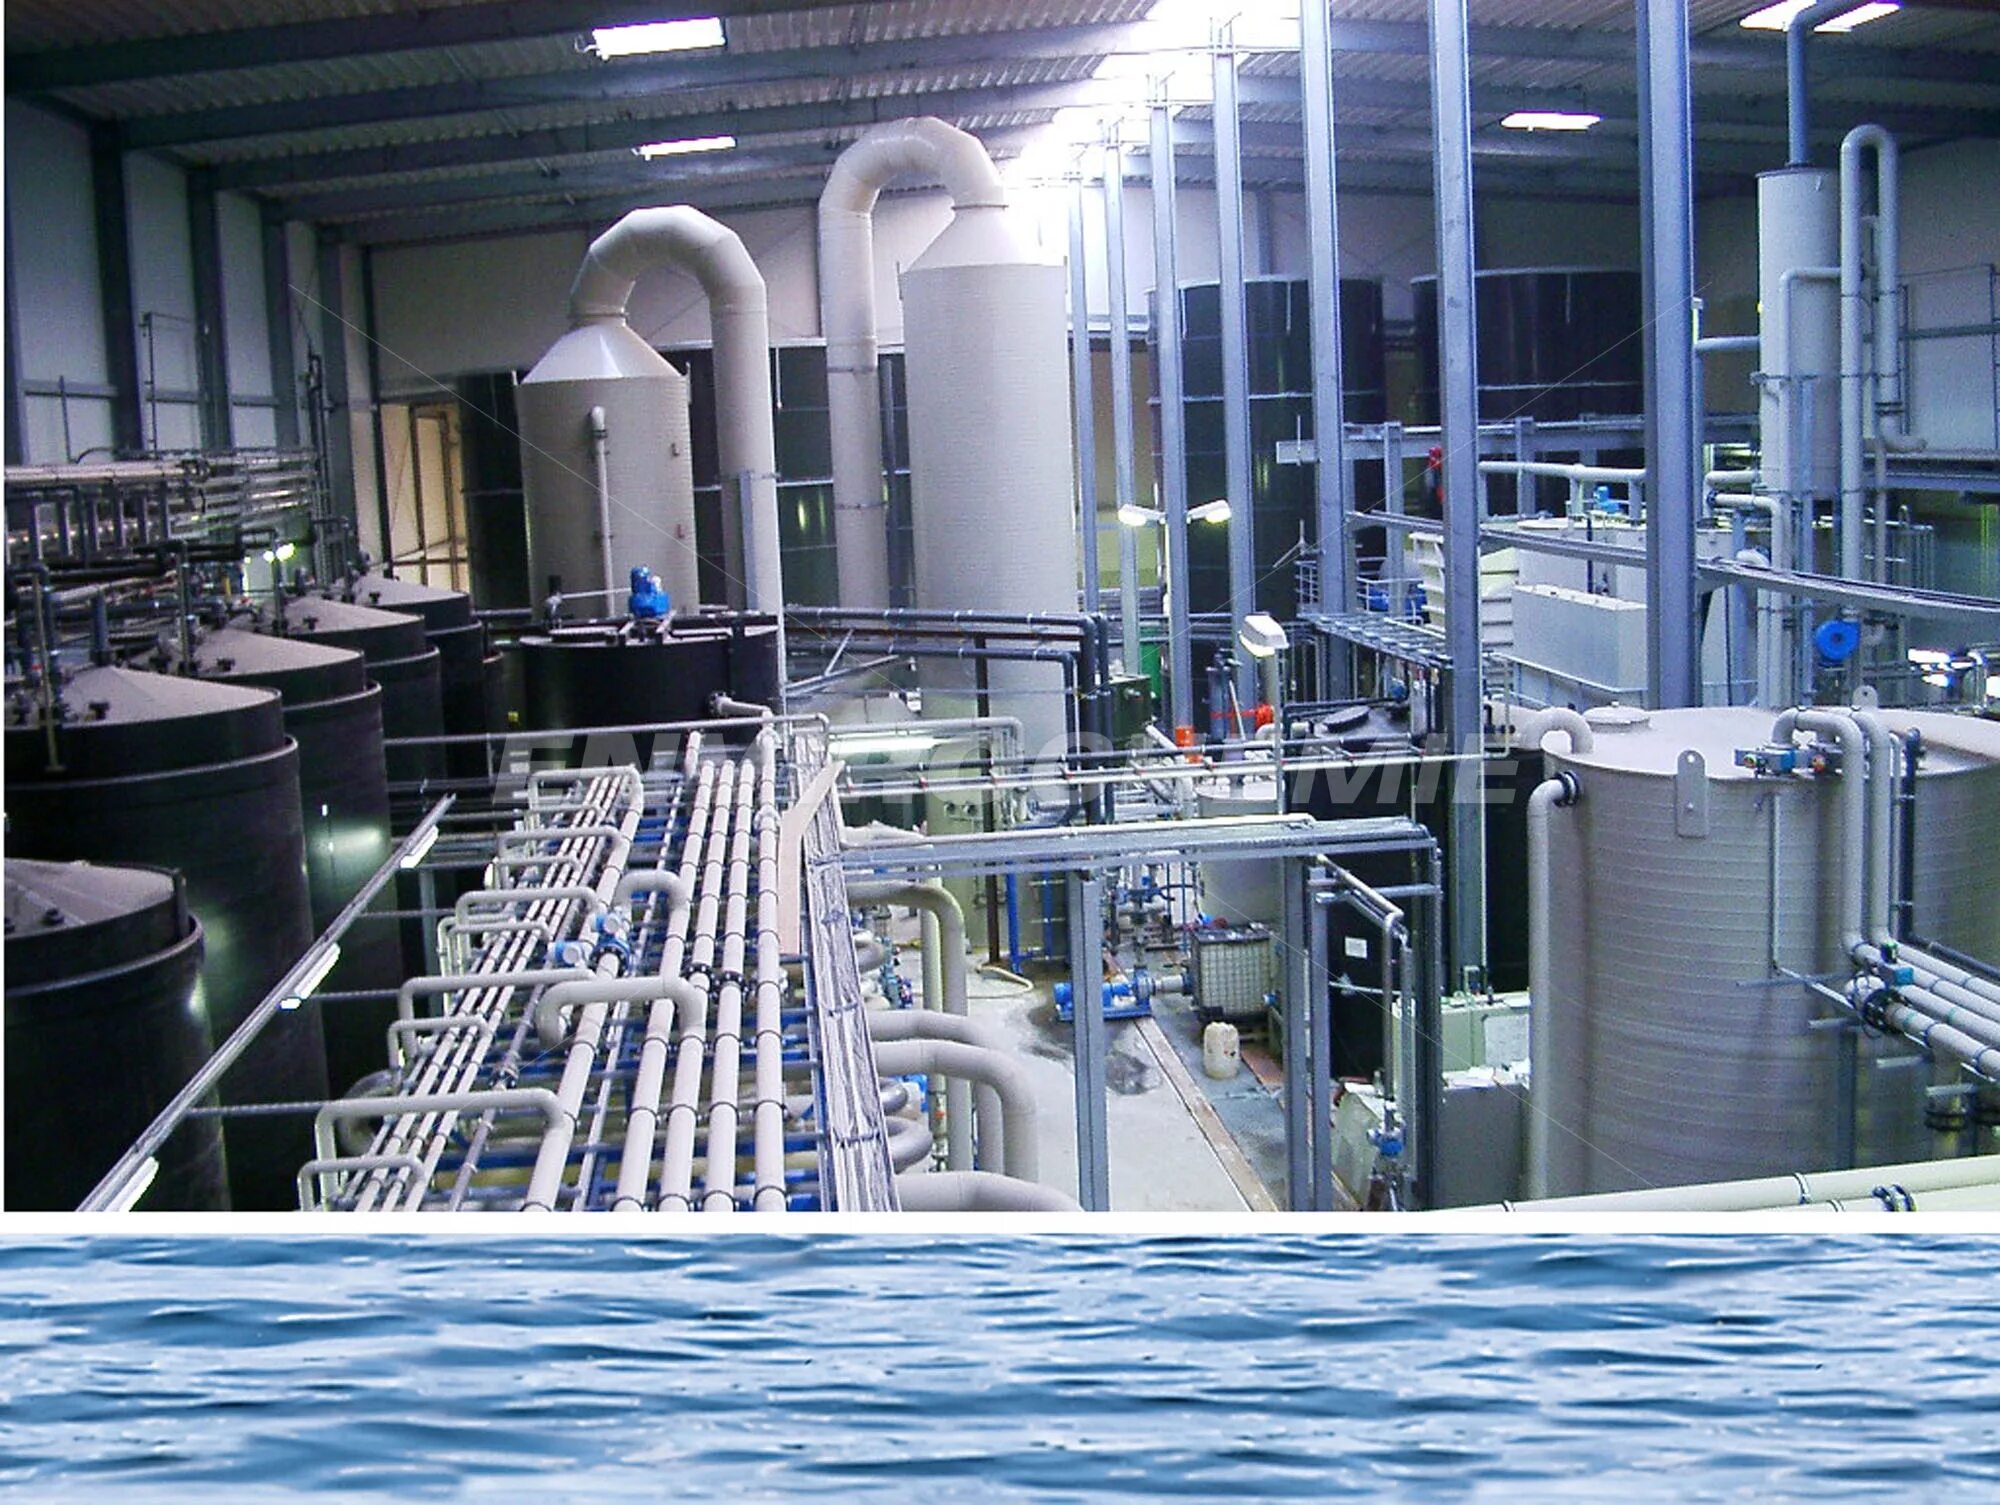 Industry plants. Industrial Wastewater treatment Plant. Effluent treatment Plant. Industrial Water treatment. Water treatment Systems.